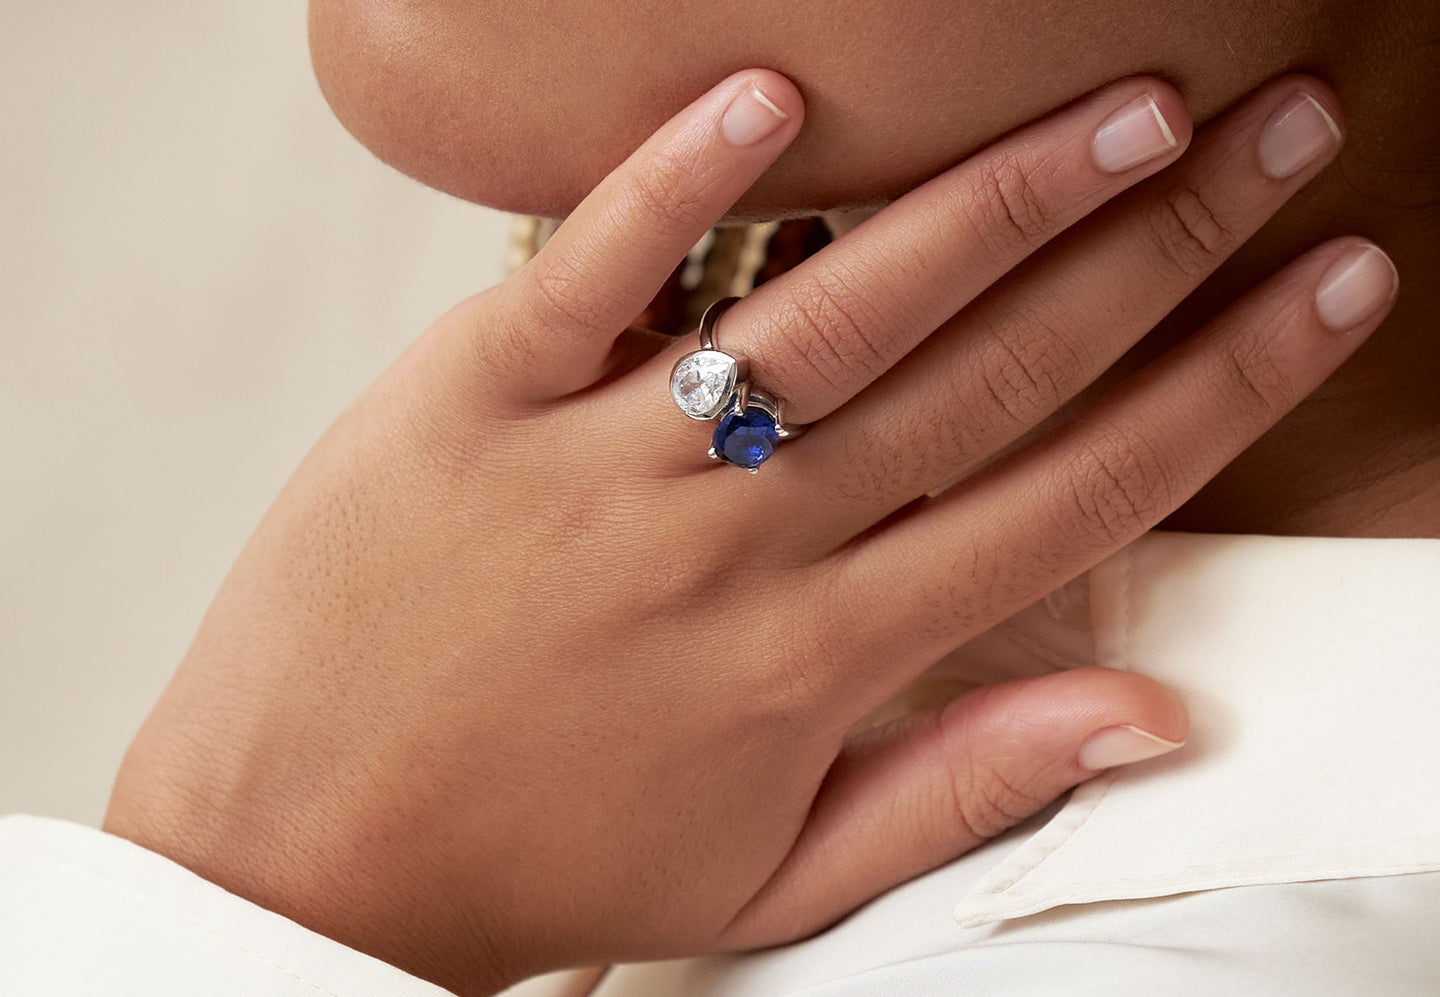 The Gem Bezel Toi et Moi with a pear-cut diamond and oval-cut blue sapphire by Holden on hand